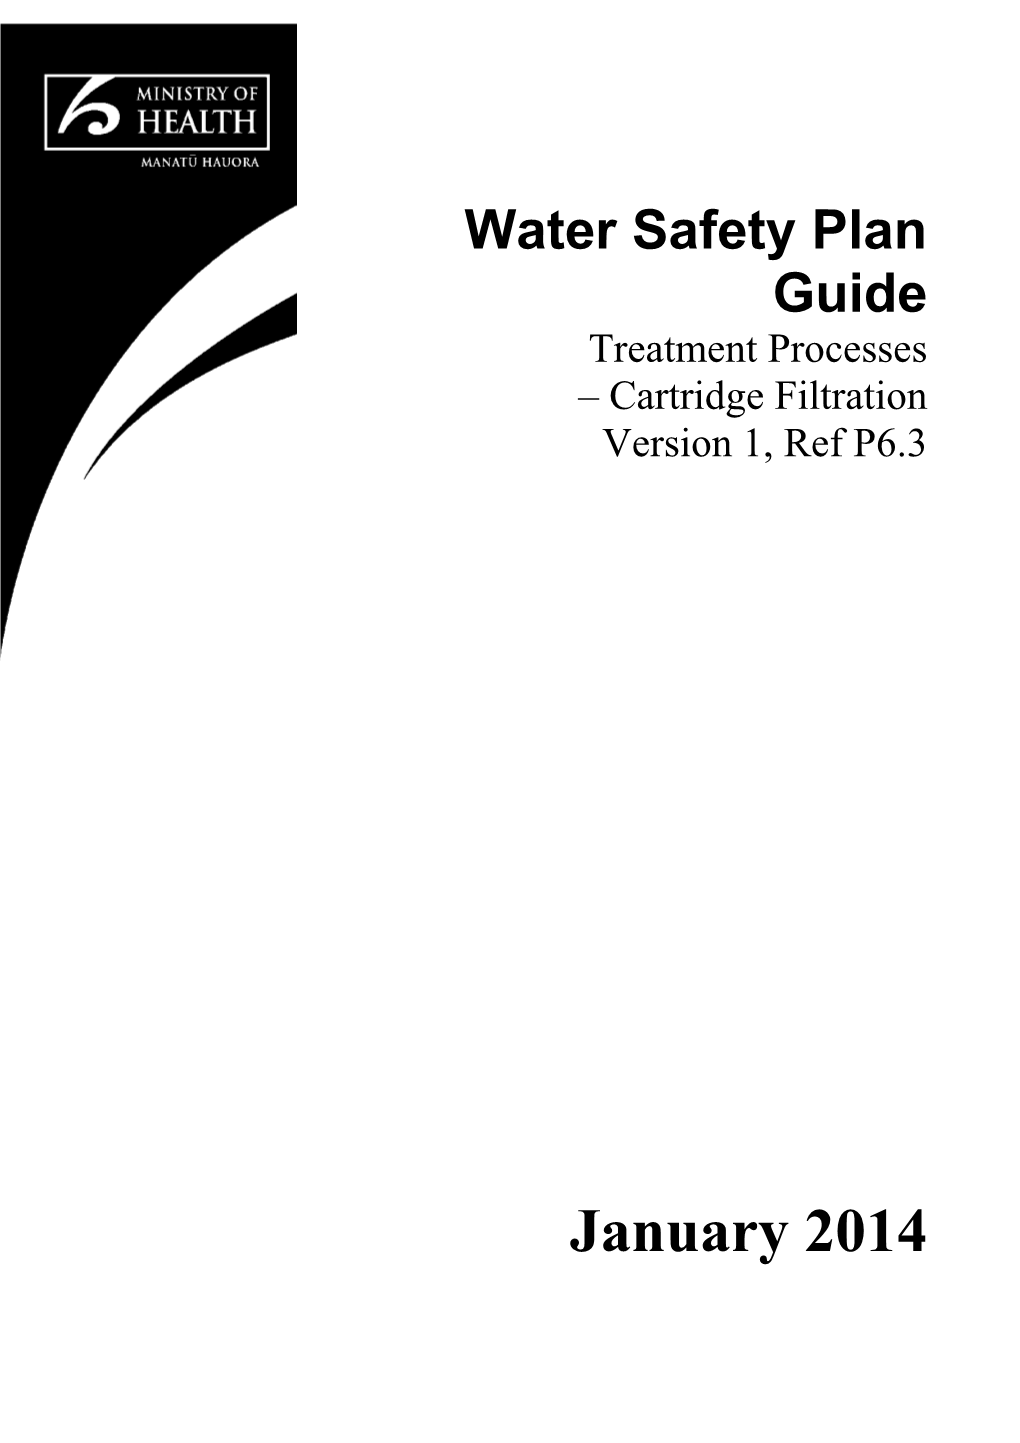 Water Safety Plan Guide: Treatment Processes Cartridge Filtration